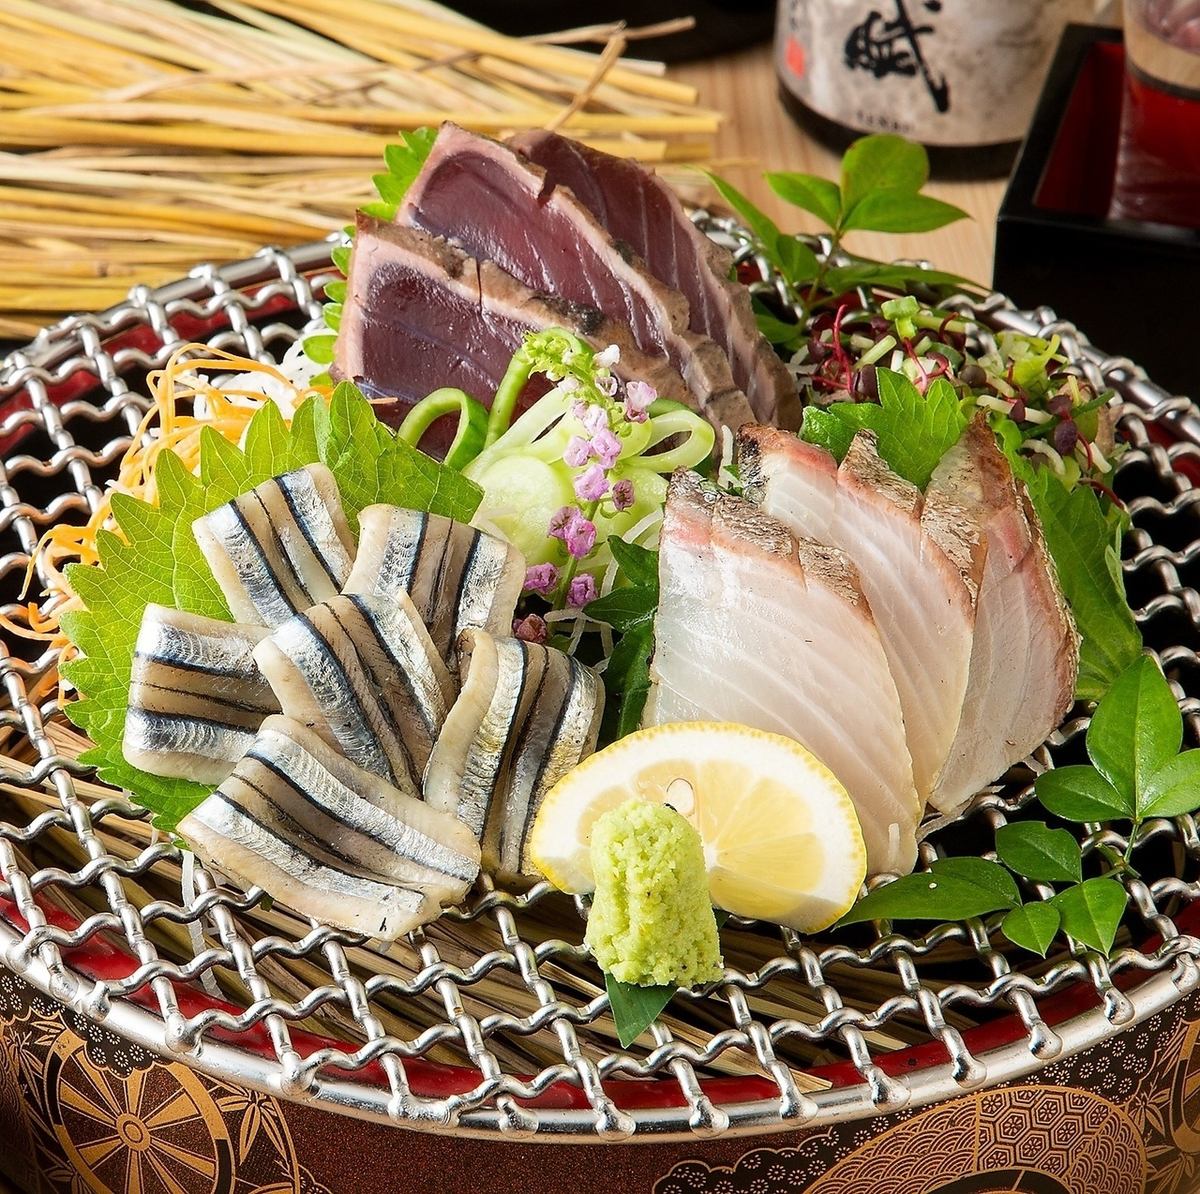 Excellent compatibility with alcohol ◎ Please enjoy fresh fish delivered directly from the market in a private room!